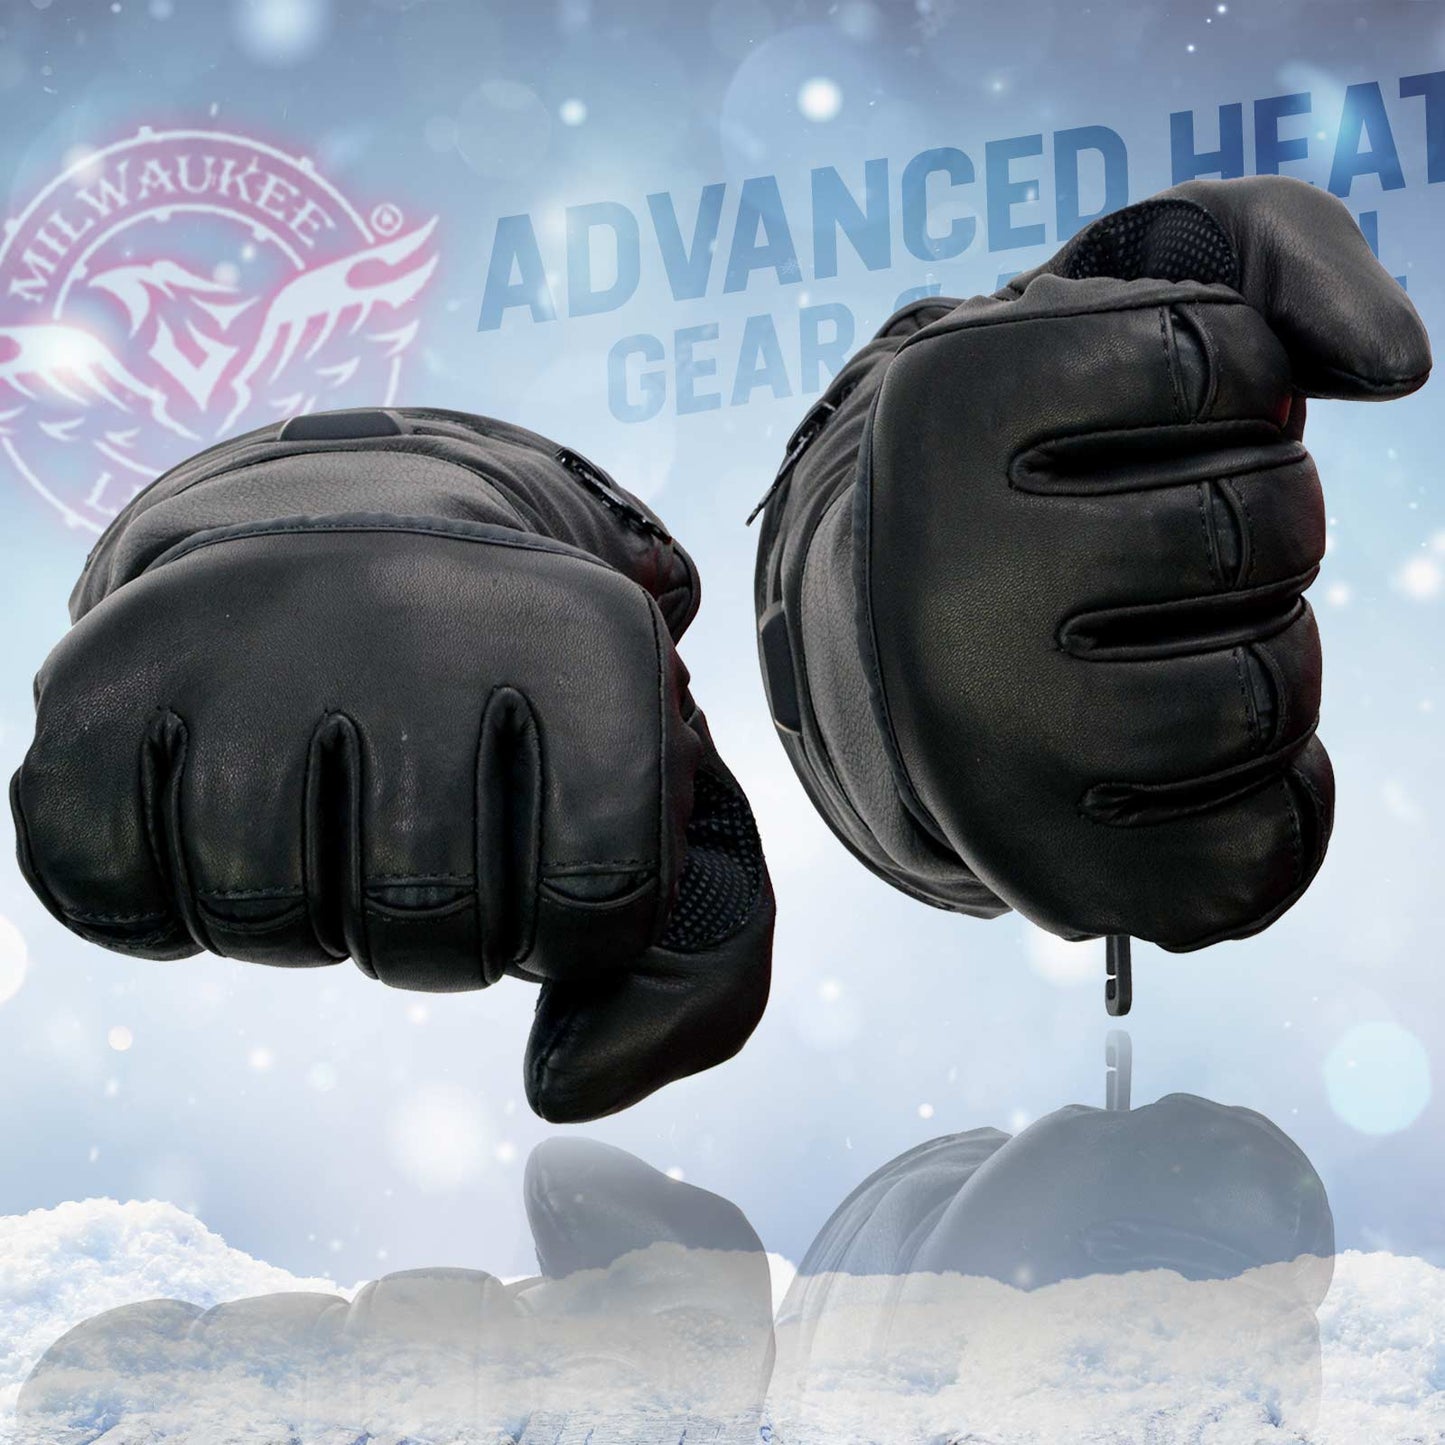 Milwaukee Leather MG7513SET Men’s Heated Winter Gloves for Motorcycle Ski Hunting w/ Battery/Harness Wire and i-Touch